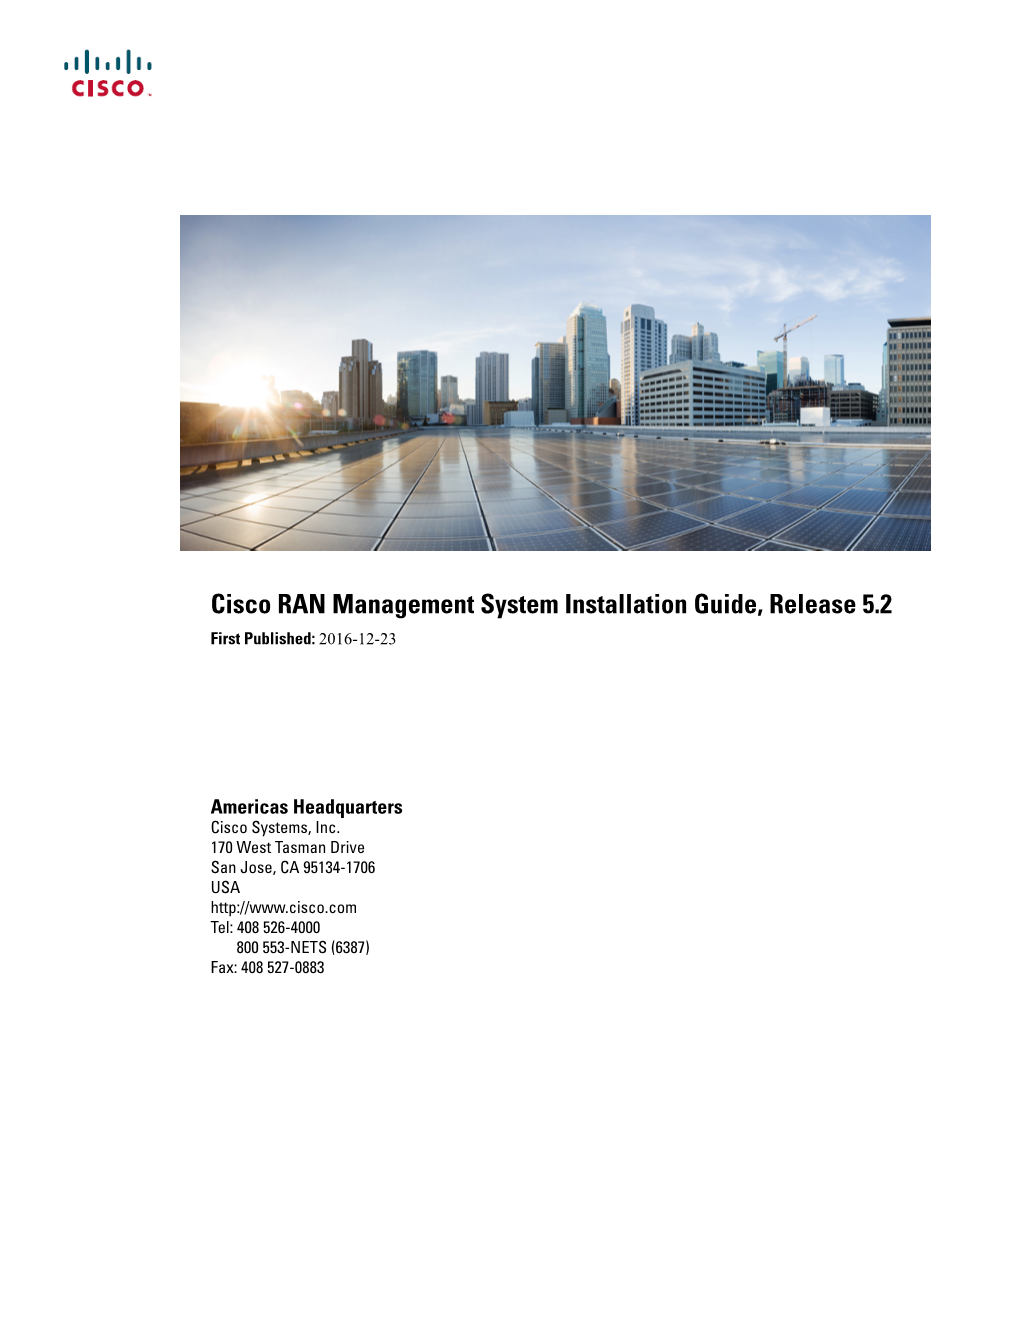 Cisco RAN Management System Installation Guide, Release 5.2 First Published: 2016-12-23